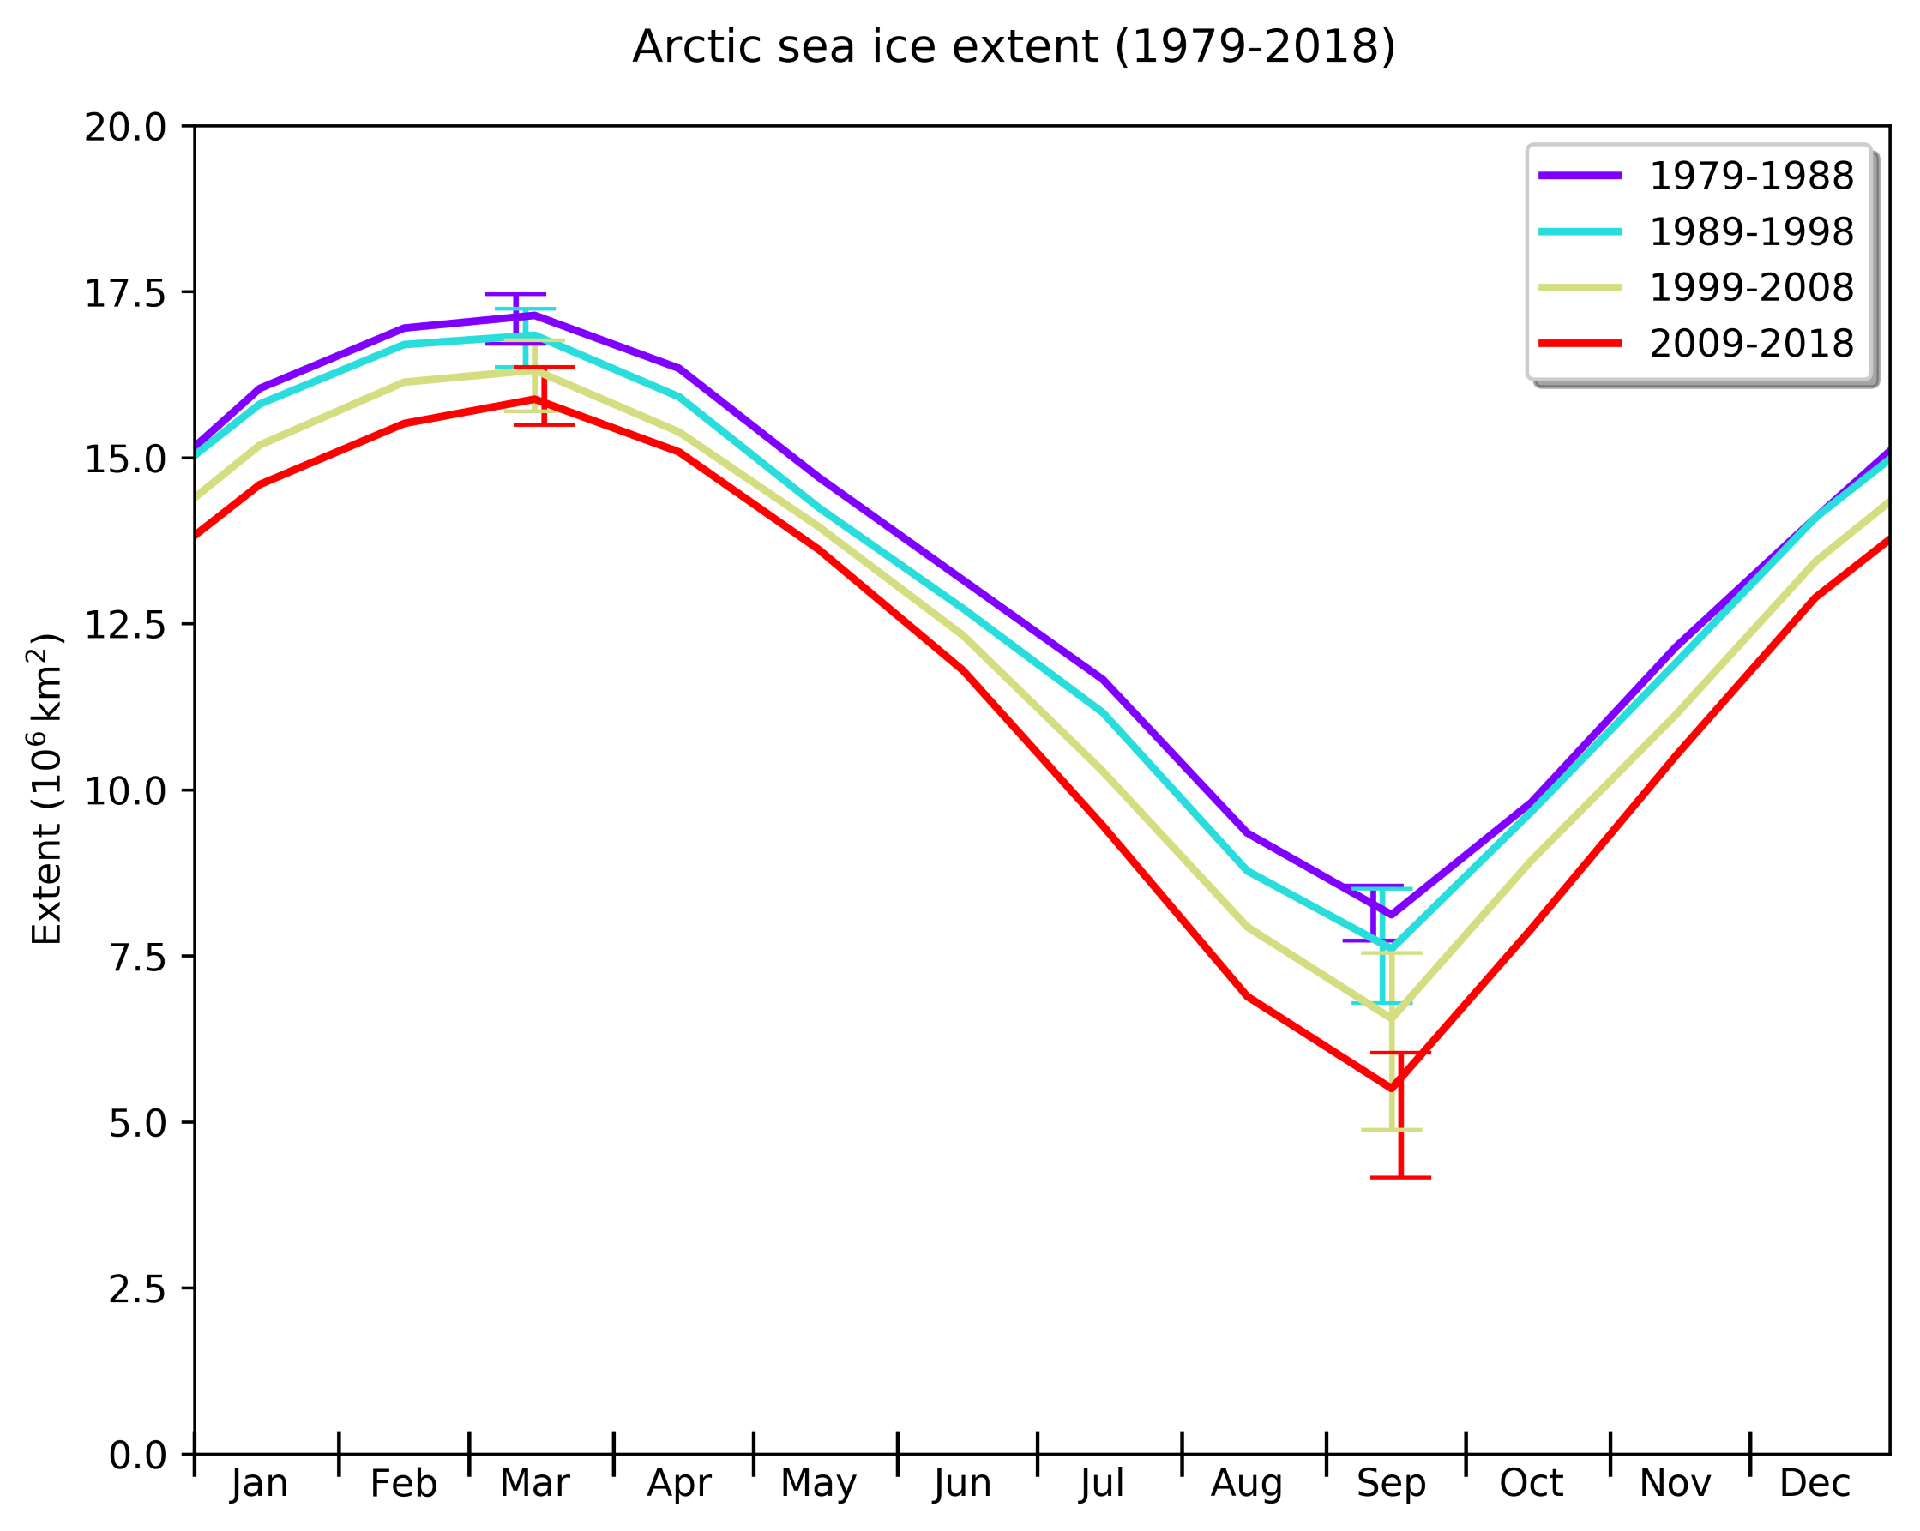 Seasonal cycle of Arctic sea ice cover illustrated by decadal averages of daily extent.